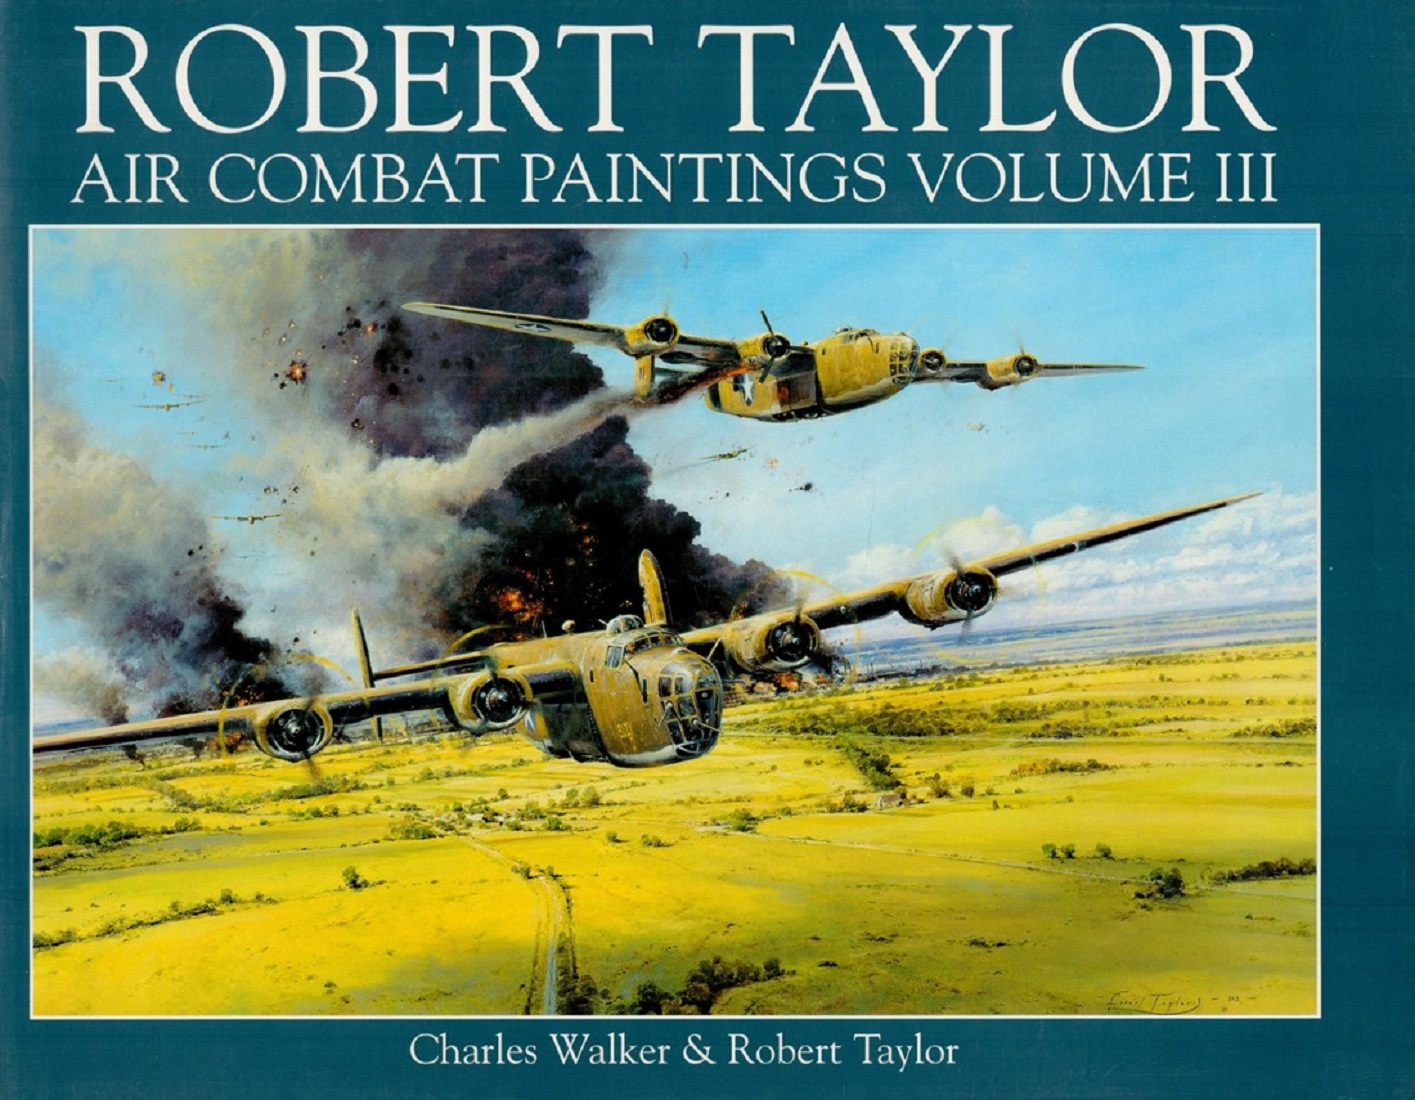 The Air Combat Paintings of Robert Taylor volumes 1, 2, 3, vol 1 1995 7th Edition with Slipcase, vol - Image 3 of 5